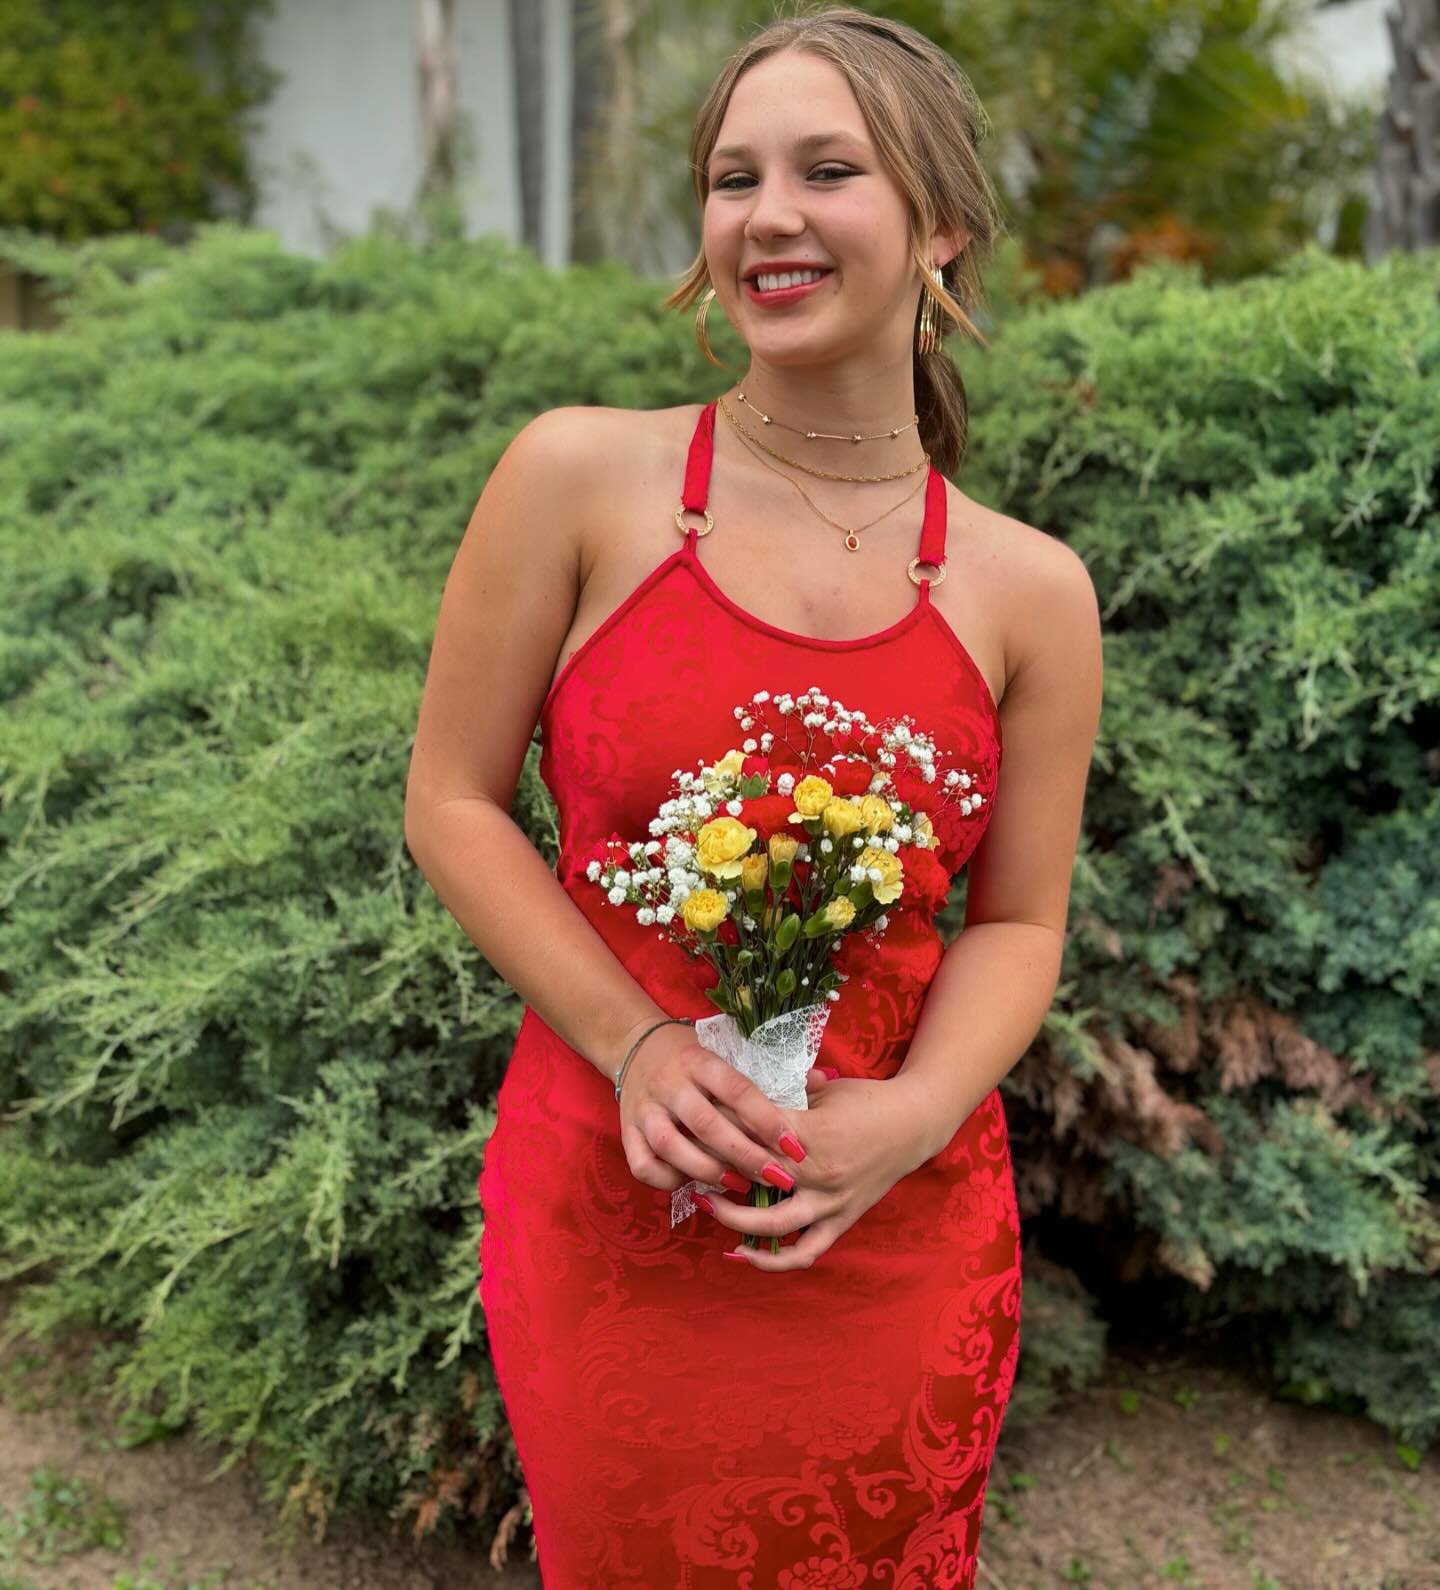 #SENIORCHALLENGE 😍 Vision of beauty. My gorgeous girl on her senior prom. It&rsquo;s life. Rite of passage. Her beautiful friends and community surrounding. ❤️ Pride and joy. ❤️#mamalife #chloegracekaz #dospuebloshighschool